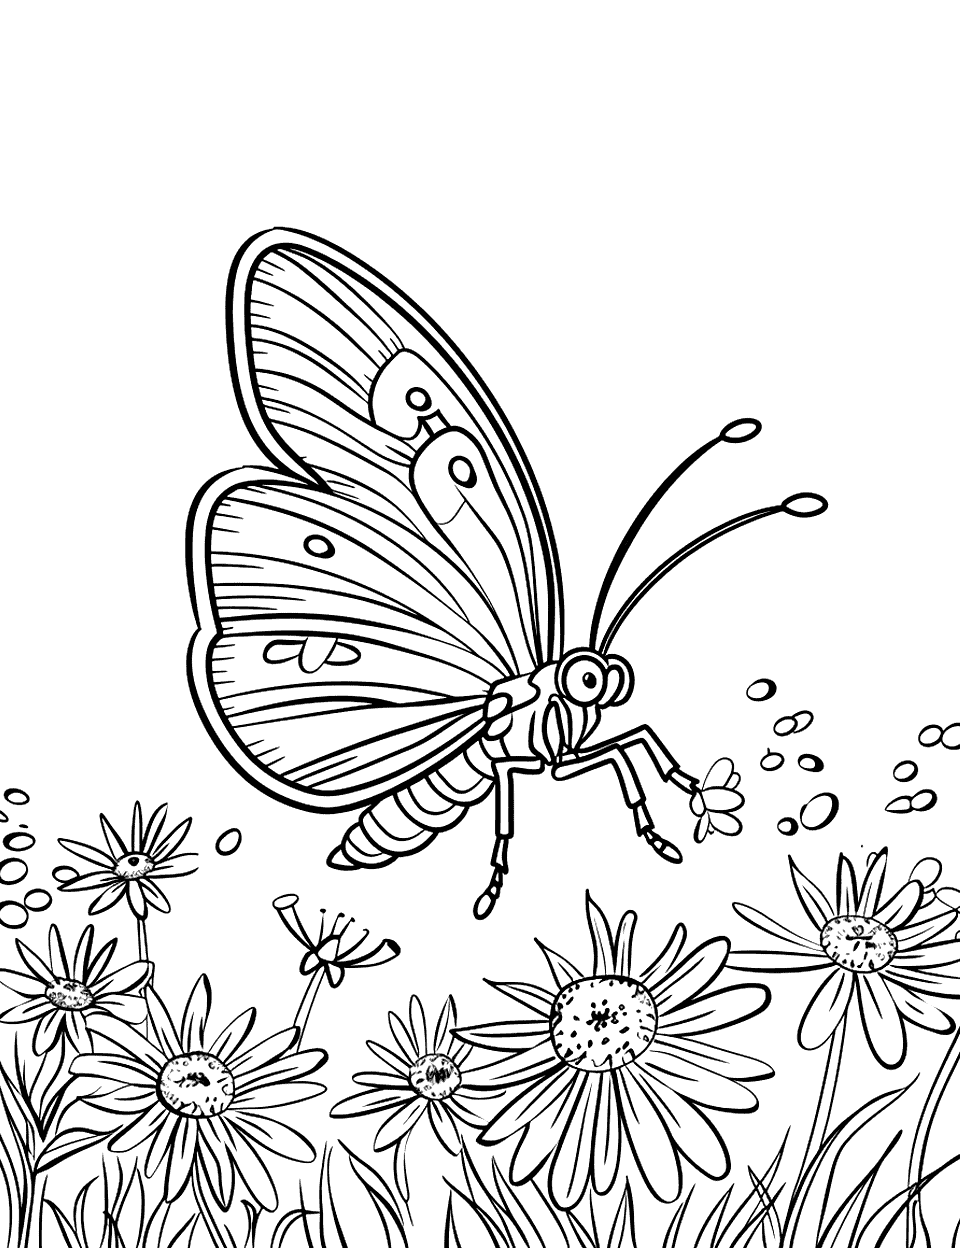 Summer Butterfly in the Meadow Insect Coloring Page - A butterfly fluttering through a sunlit meadow surrounded by flowers.